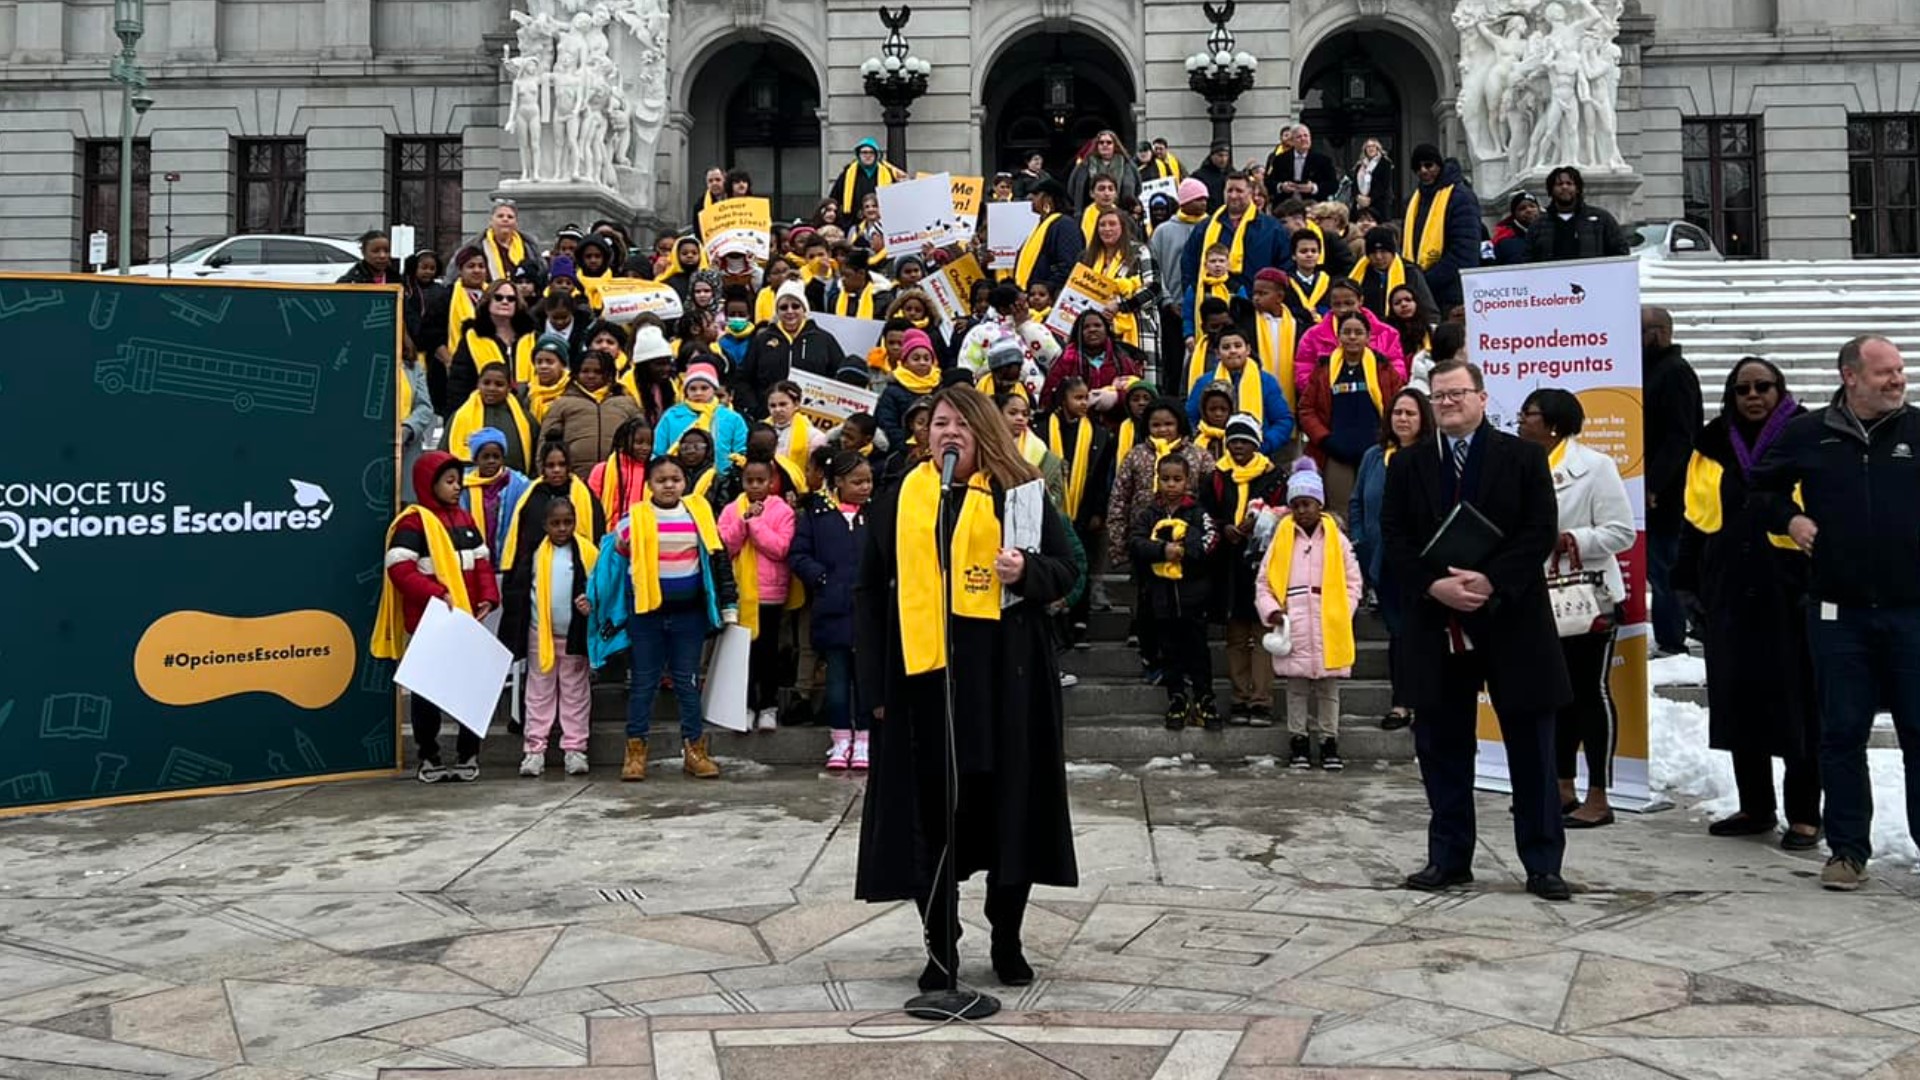 Tuesday's rally comes amid National School Choice Week